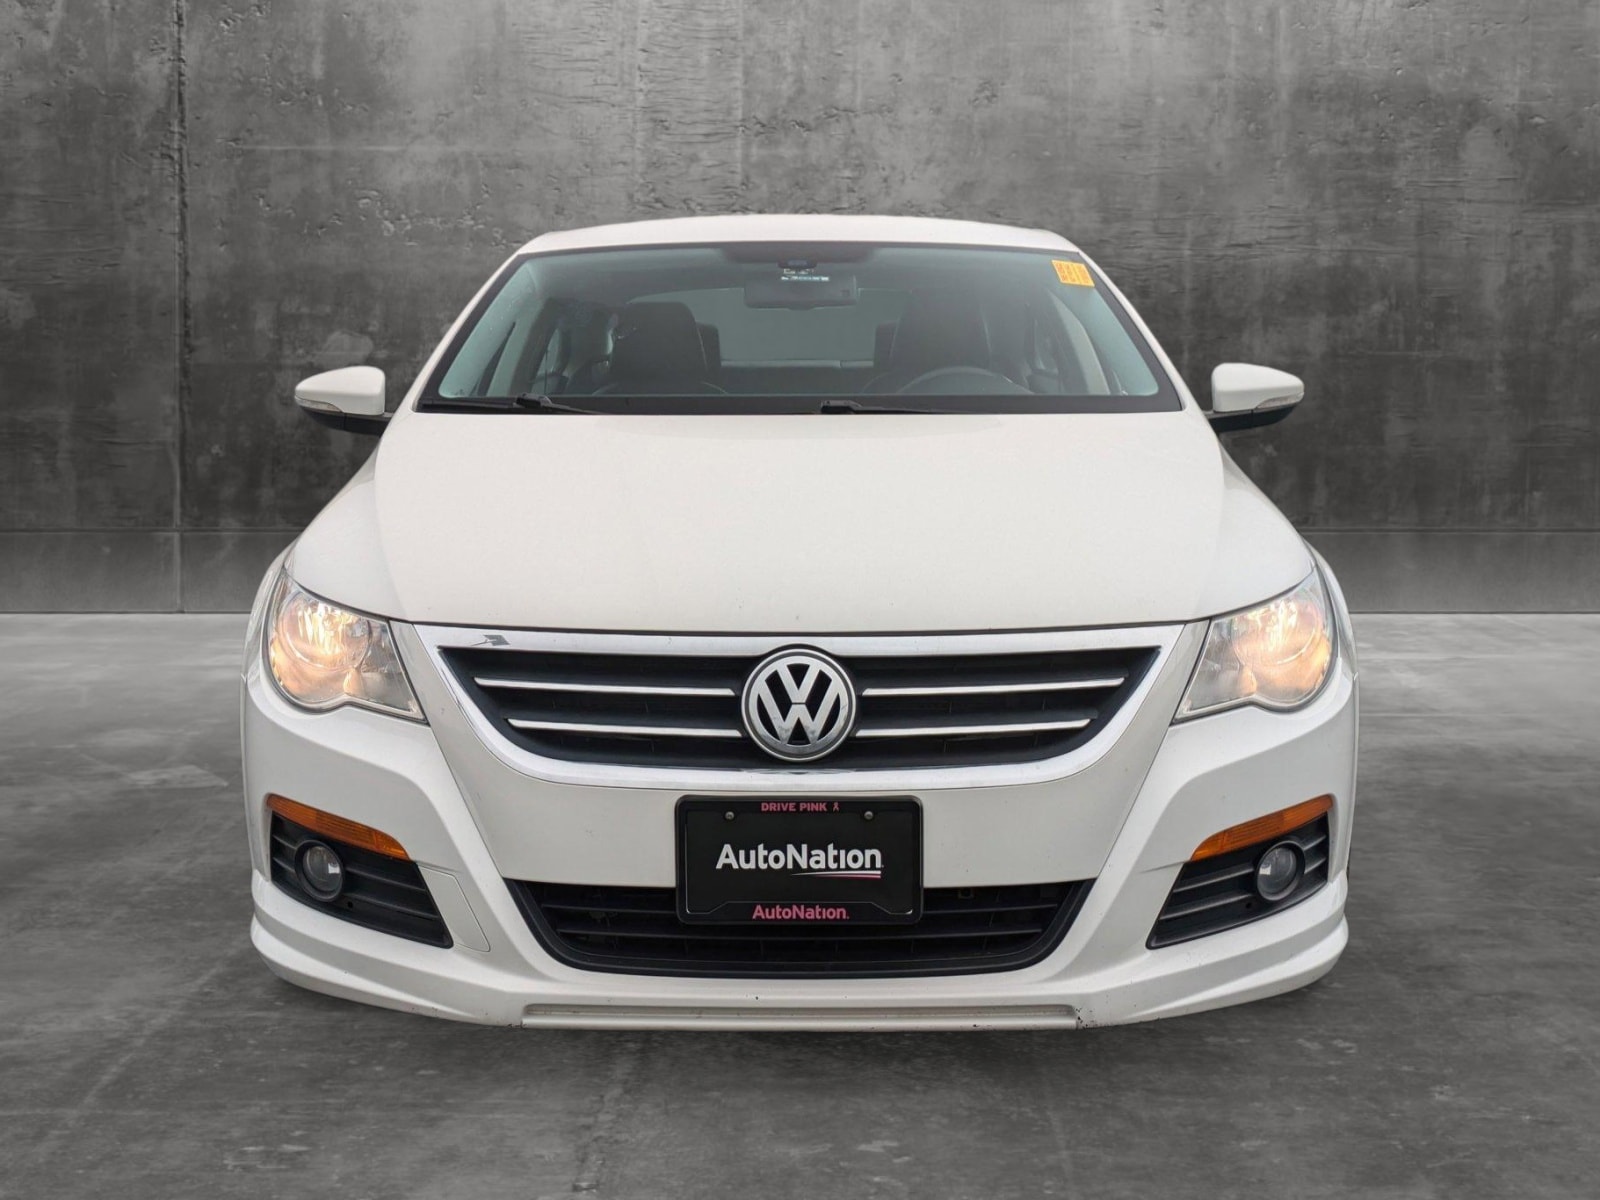 Used 2010 Volkswagen CC Sport with VIN WVWMP7ANXAE553758 for sale in Carlsbad, CA